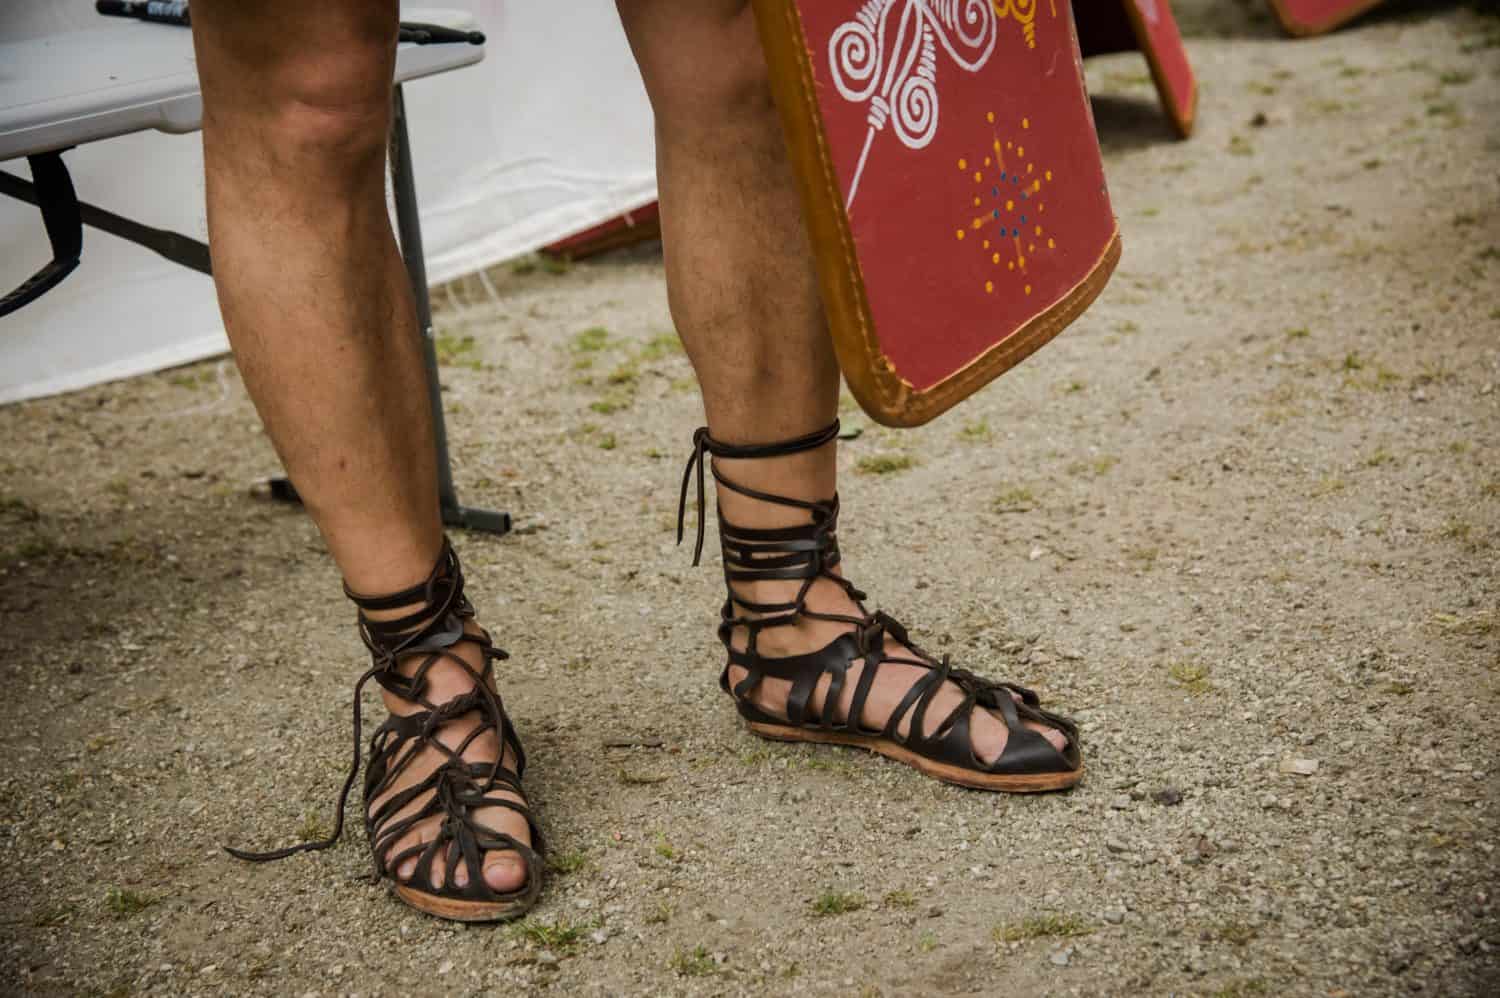 A person donning Roman sandals and holding a Roman shield, representing the ancient warriors of Rome.